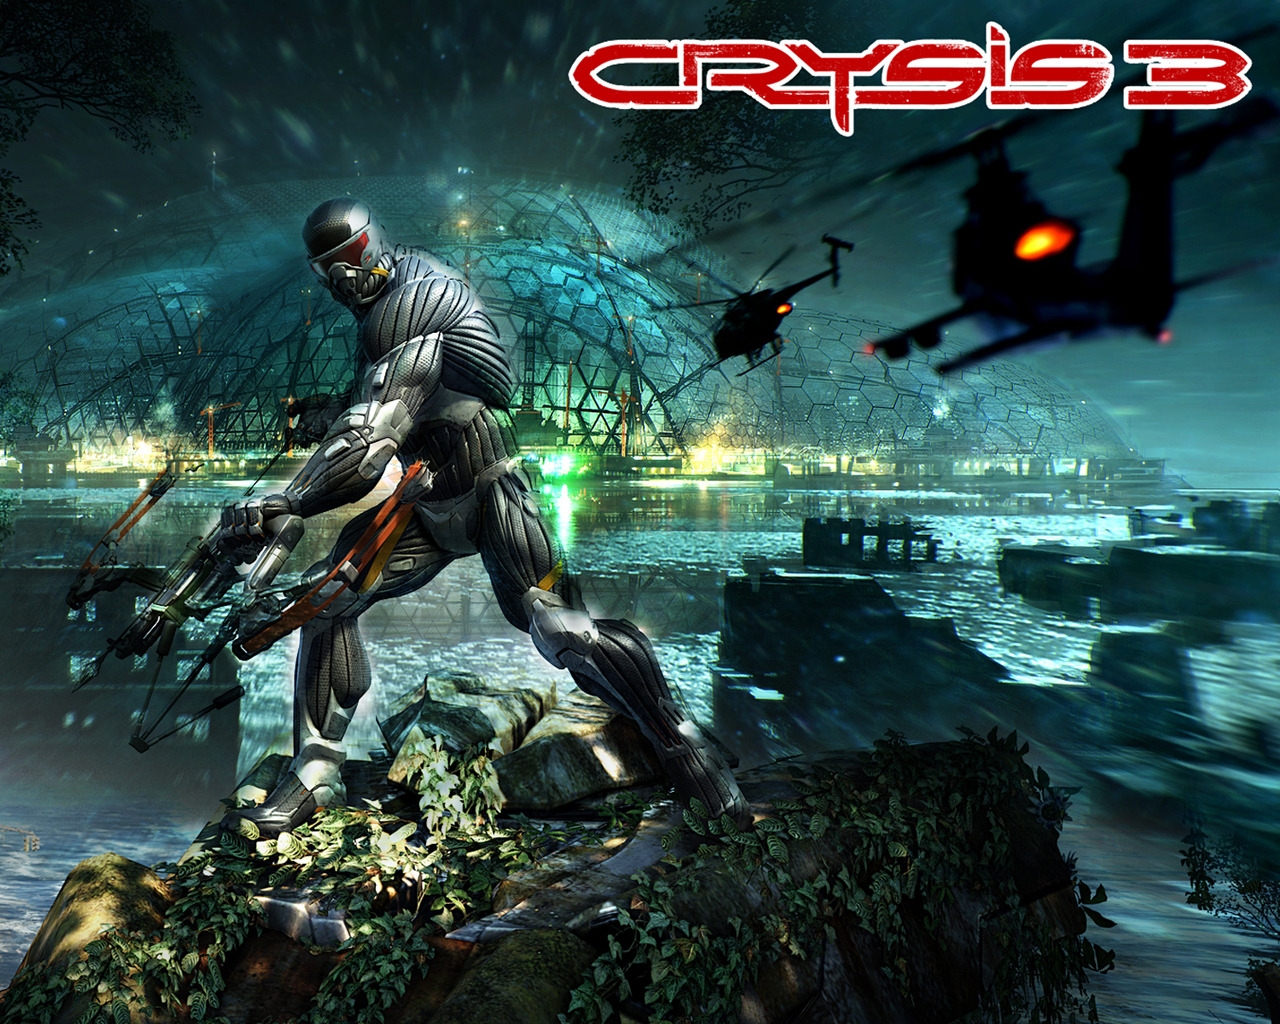 Crysis 3 Poster for 1280 x 1024 resolution